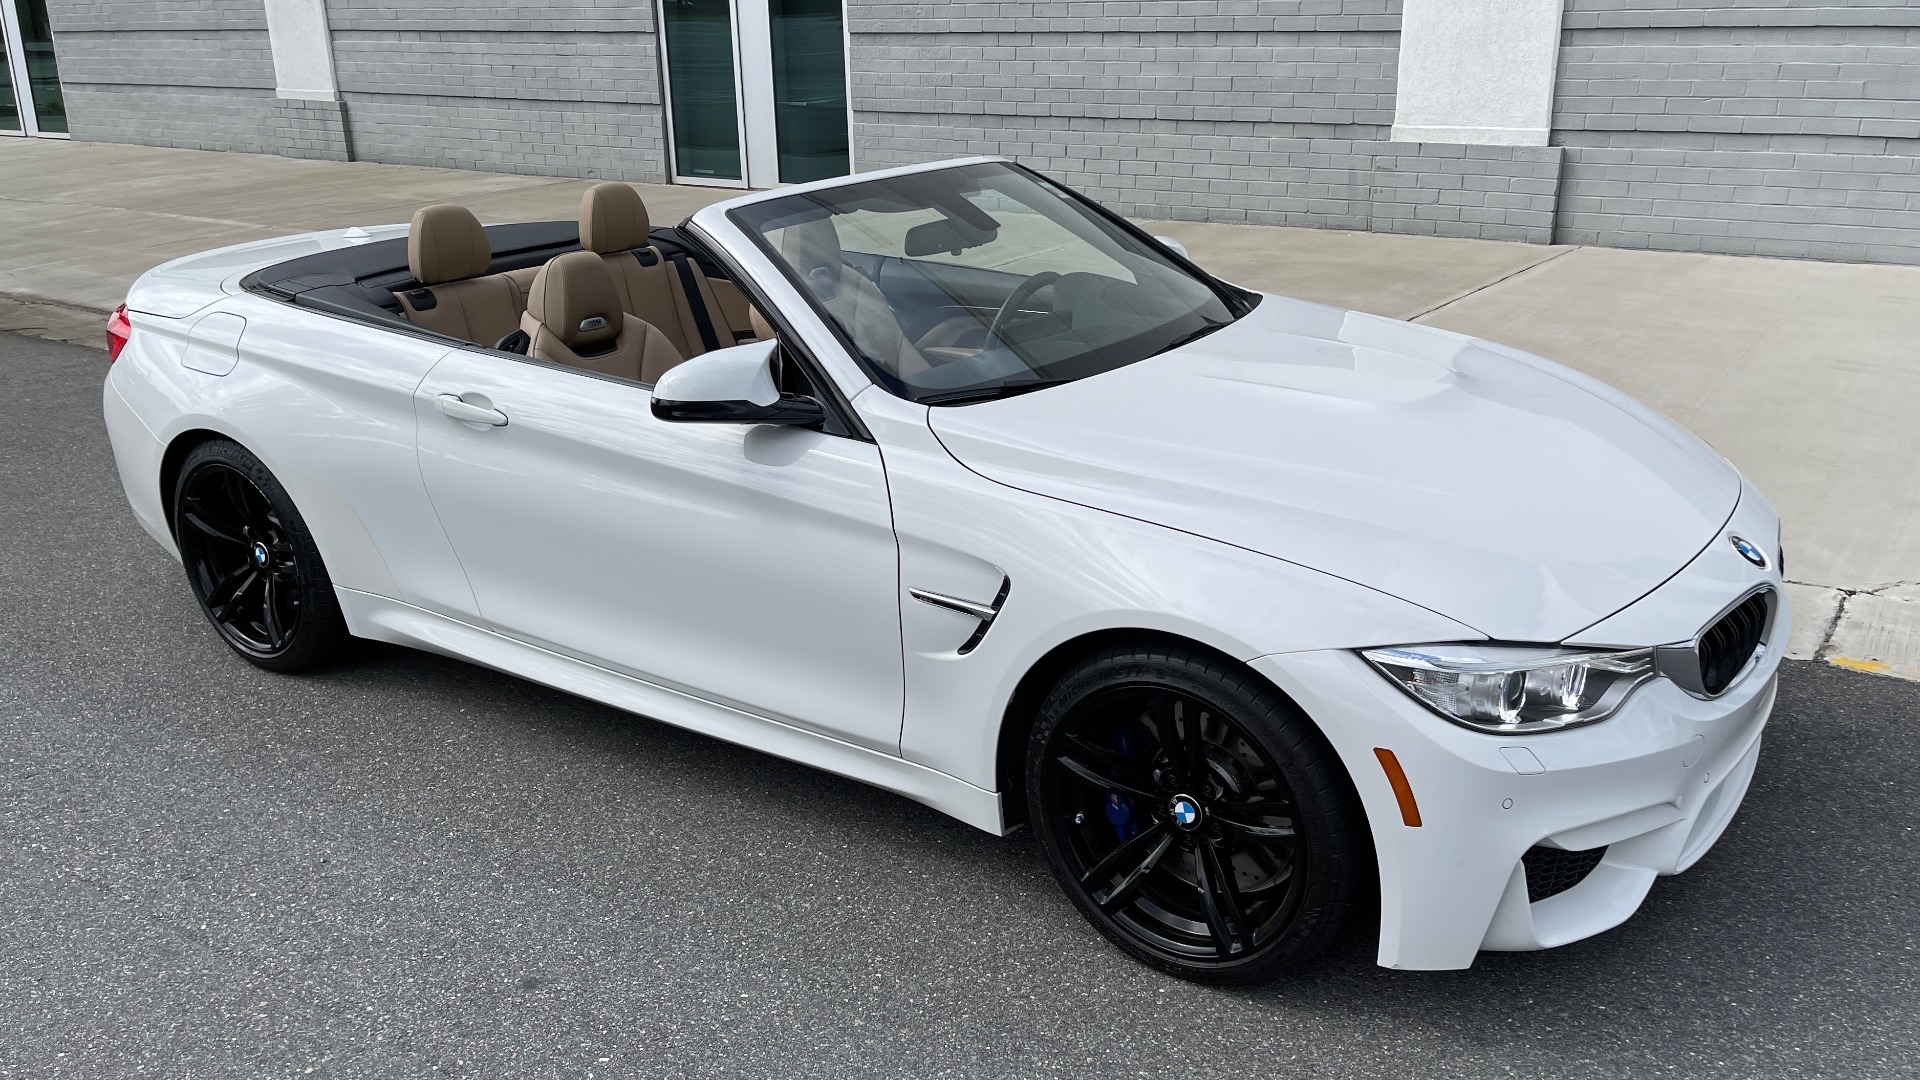 Used 2016 BMW M4 CONVERTIBLE 3.0L / 7-SPD AUTO / EXECUTIVE / ADAPT M SUSP / REARVIEW for sale Sold at Formula Imports in Charlotte NC 28227 2